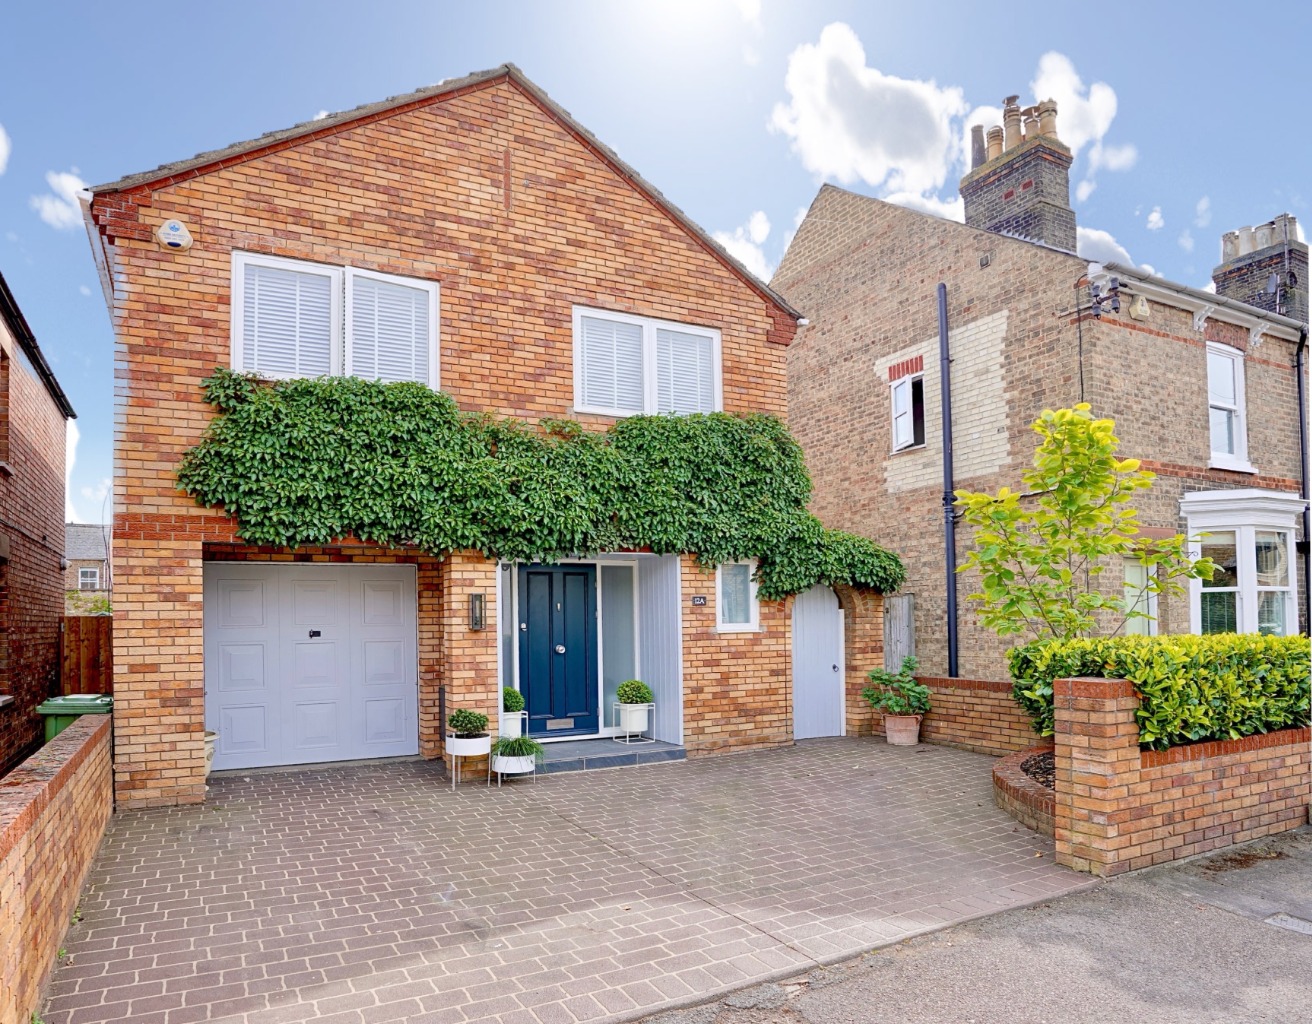 **OPEN HOUSE SATURDAY 2/7 1PM - 3PM** CALL TO BOOK YOUR TIME SLOT** STUNNING FOUR BEDROOM HOME** STONES THROW TO TOWN CENTRE** SPACIOUS KITCHEN/DINER WITH VAULTED CEILING AND EXPOSED OAK BEAMS** SOUTH FACING REAR GARDEN** SINGLE GARAGE AND DRIVEWAY**